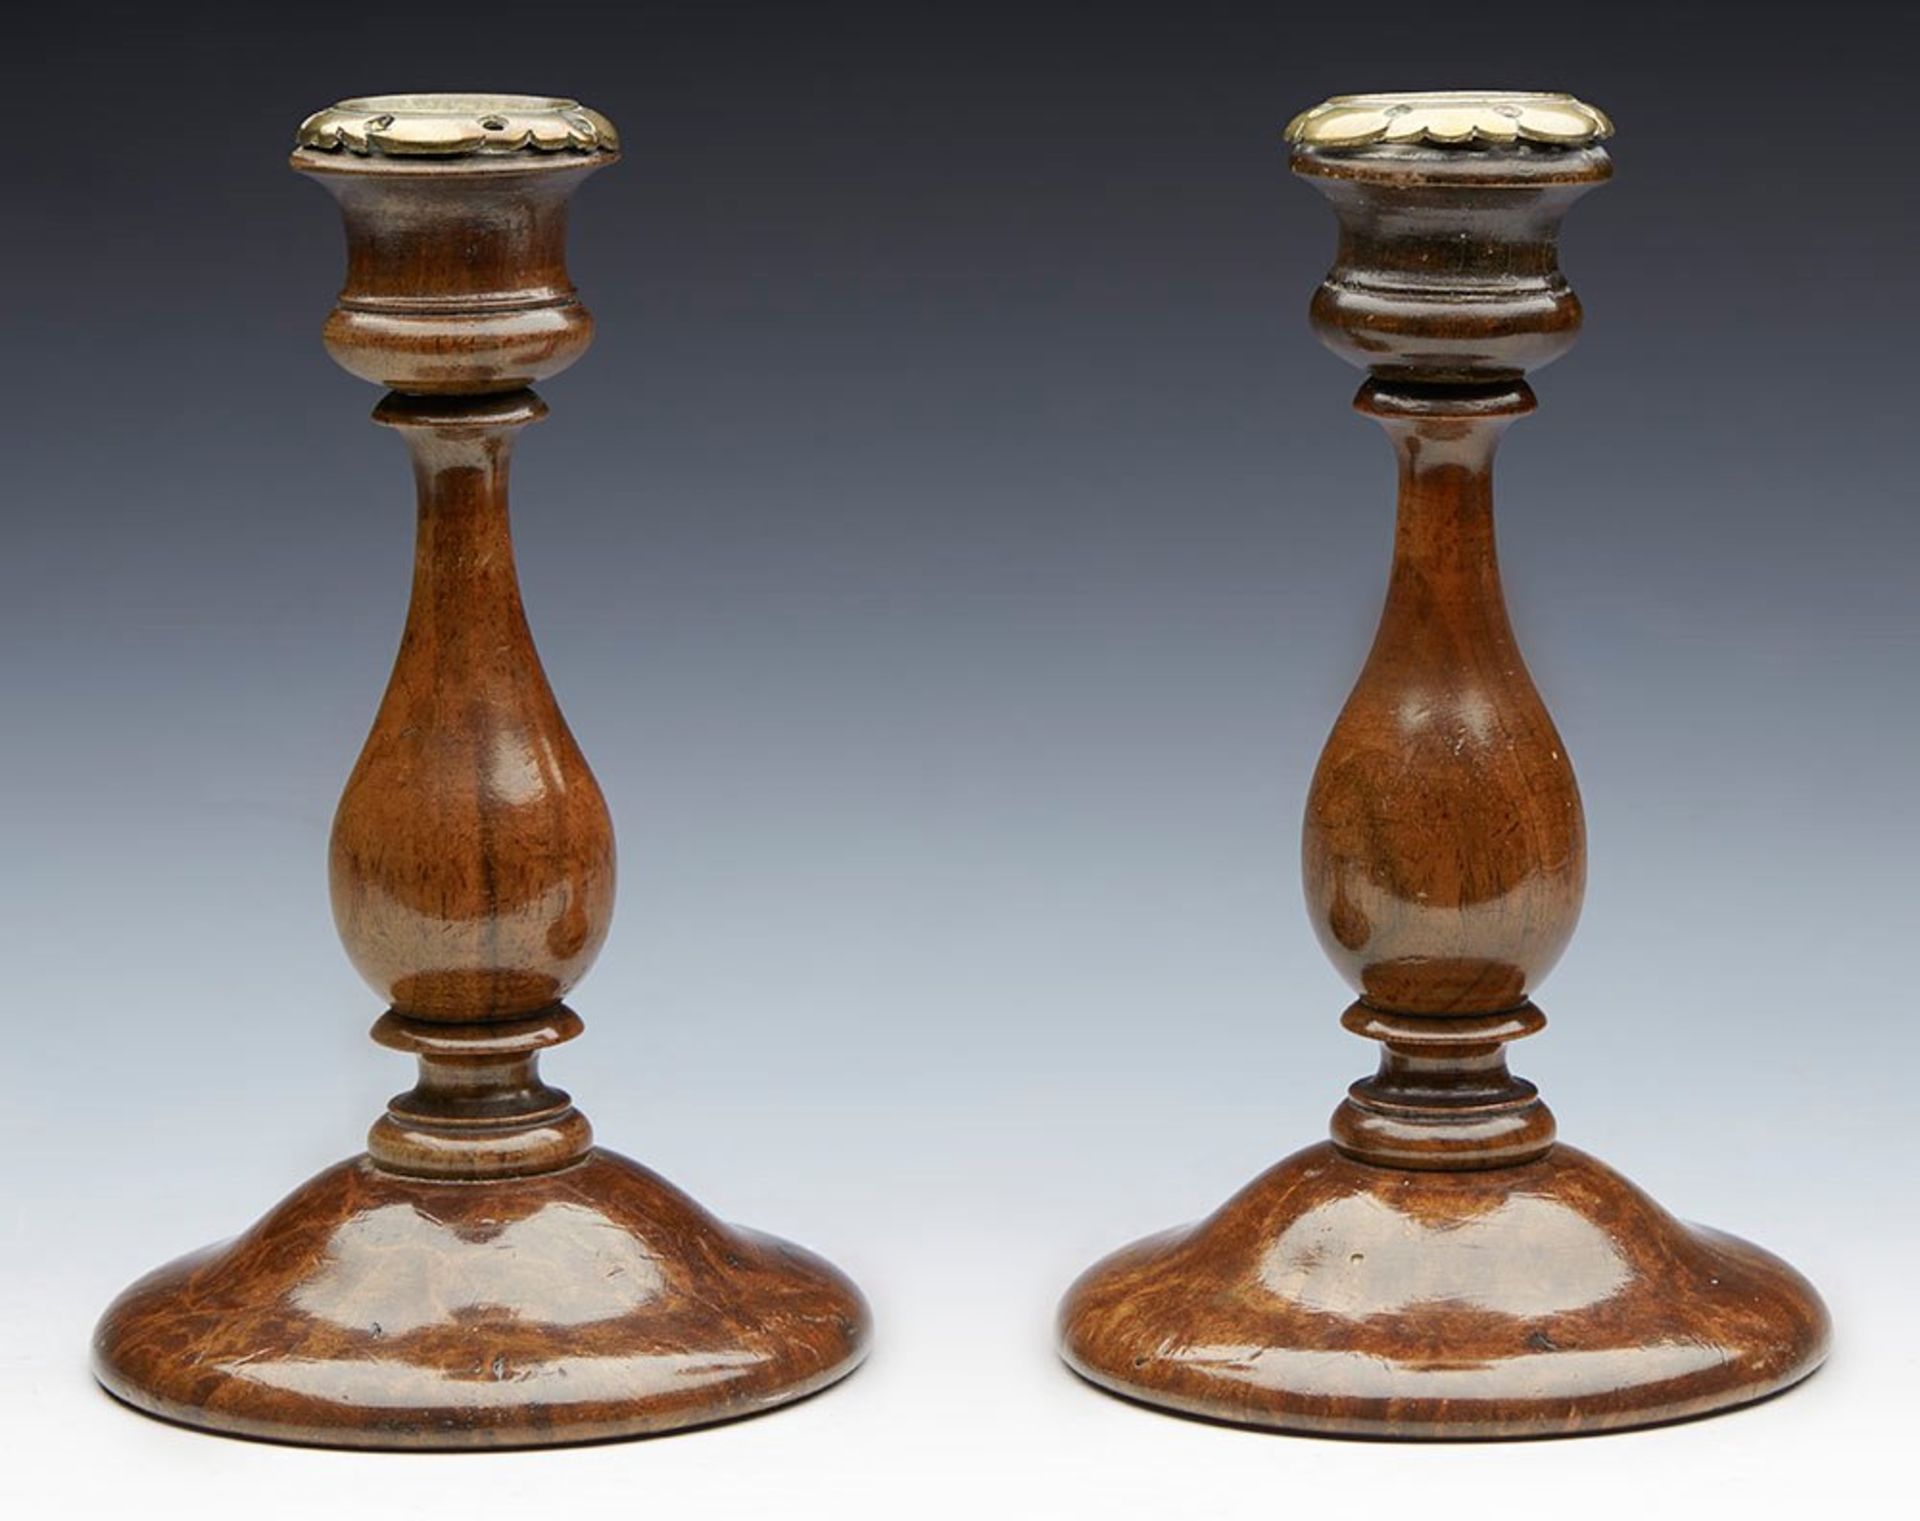 ANTIQUE BRASS MOUNTED TURNED WOOD PEDESTAL CANDLESTICKS 19TH C. - Image 4 of 7